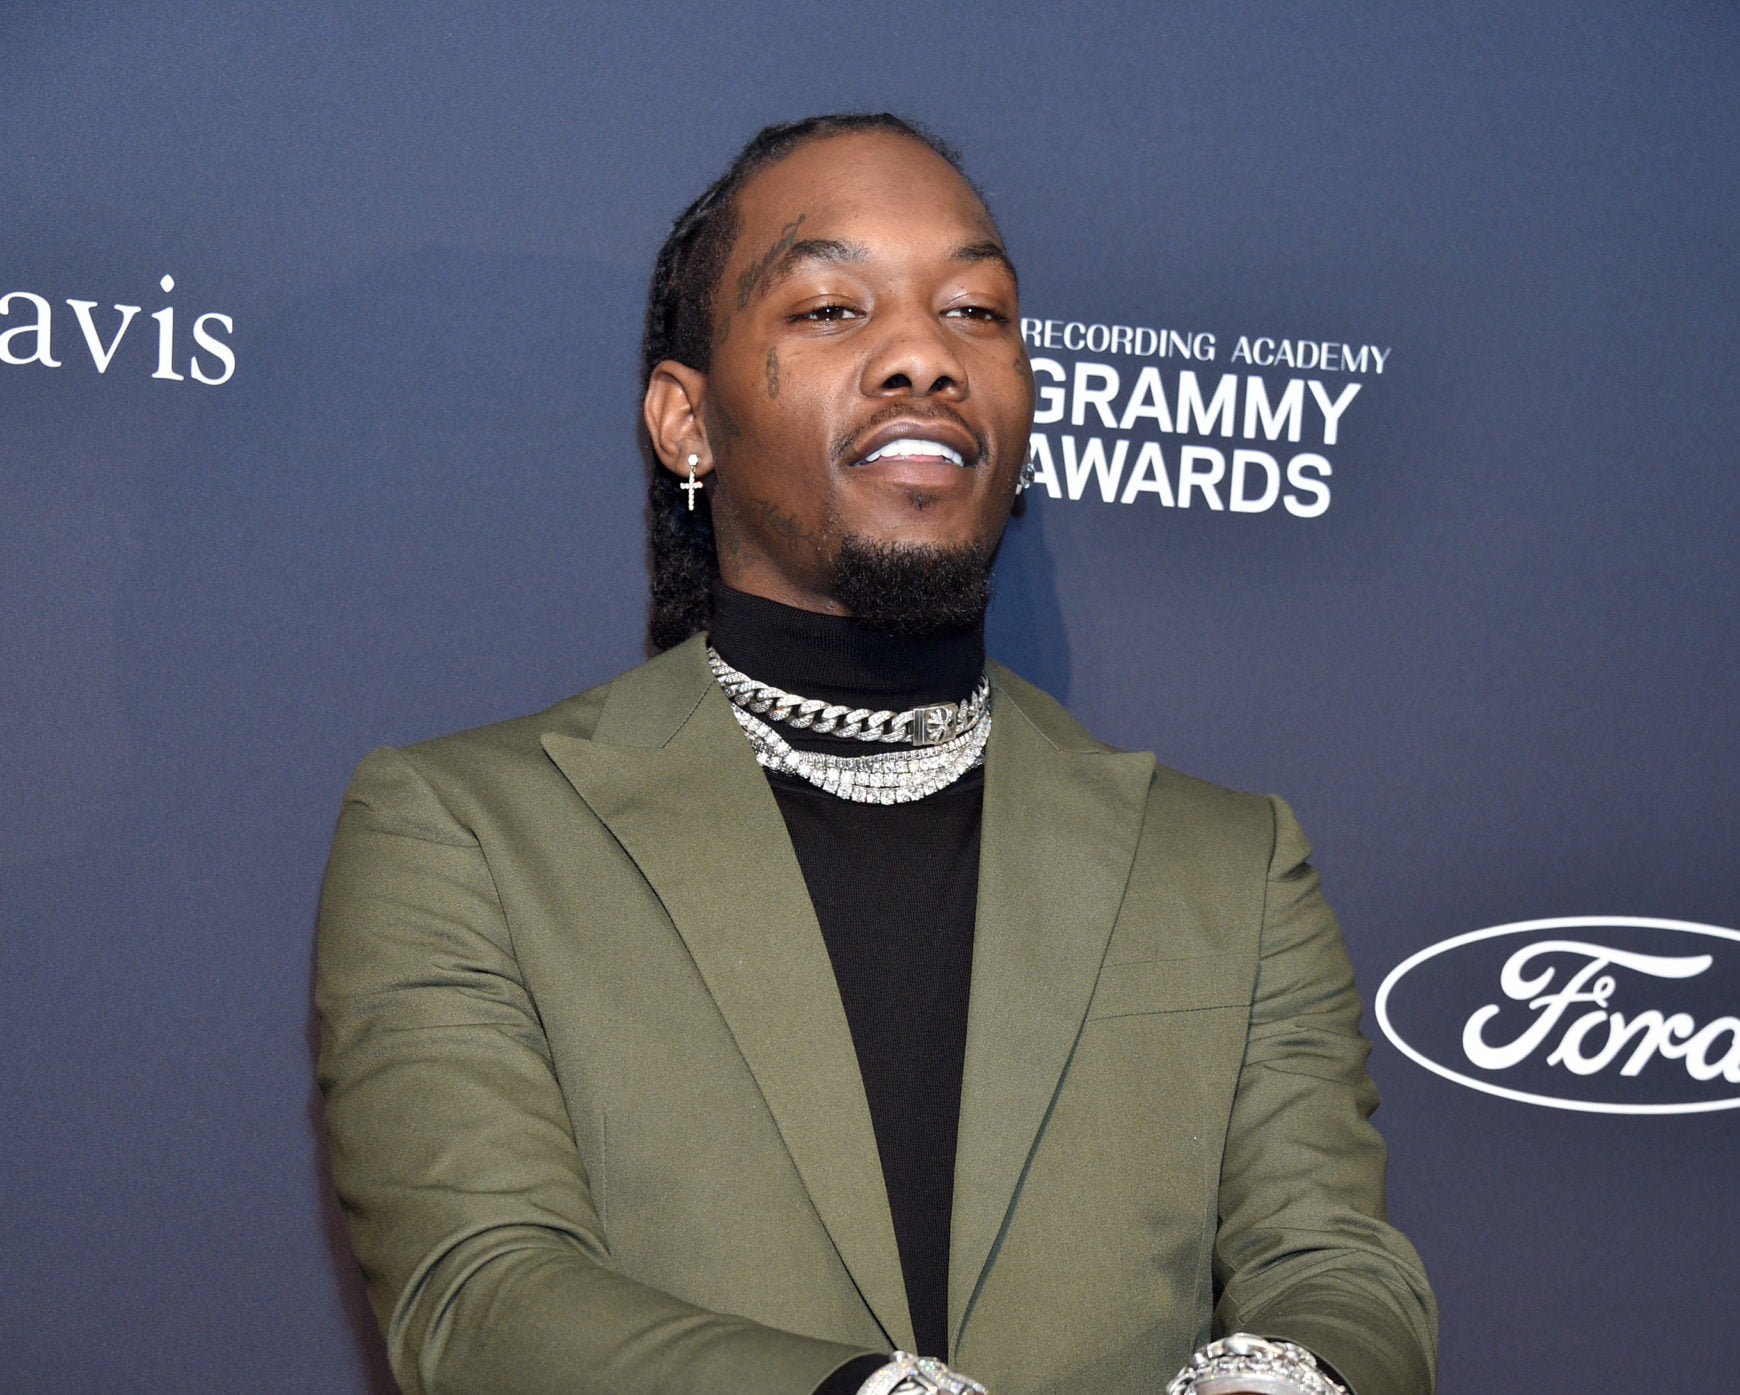 Offset Was Detained By Beverly Hills Police After Reportedly Getting Into An Altercation With Trump Supporters